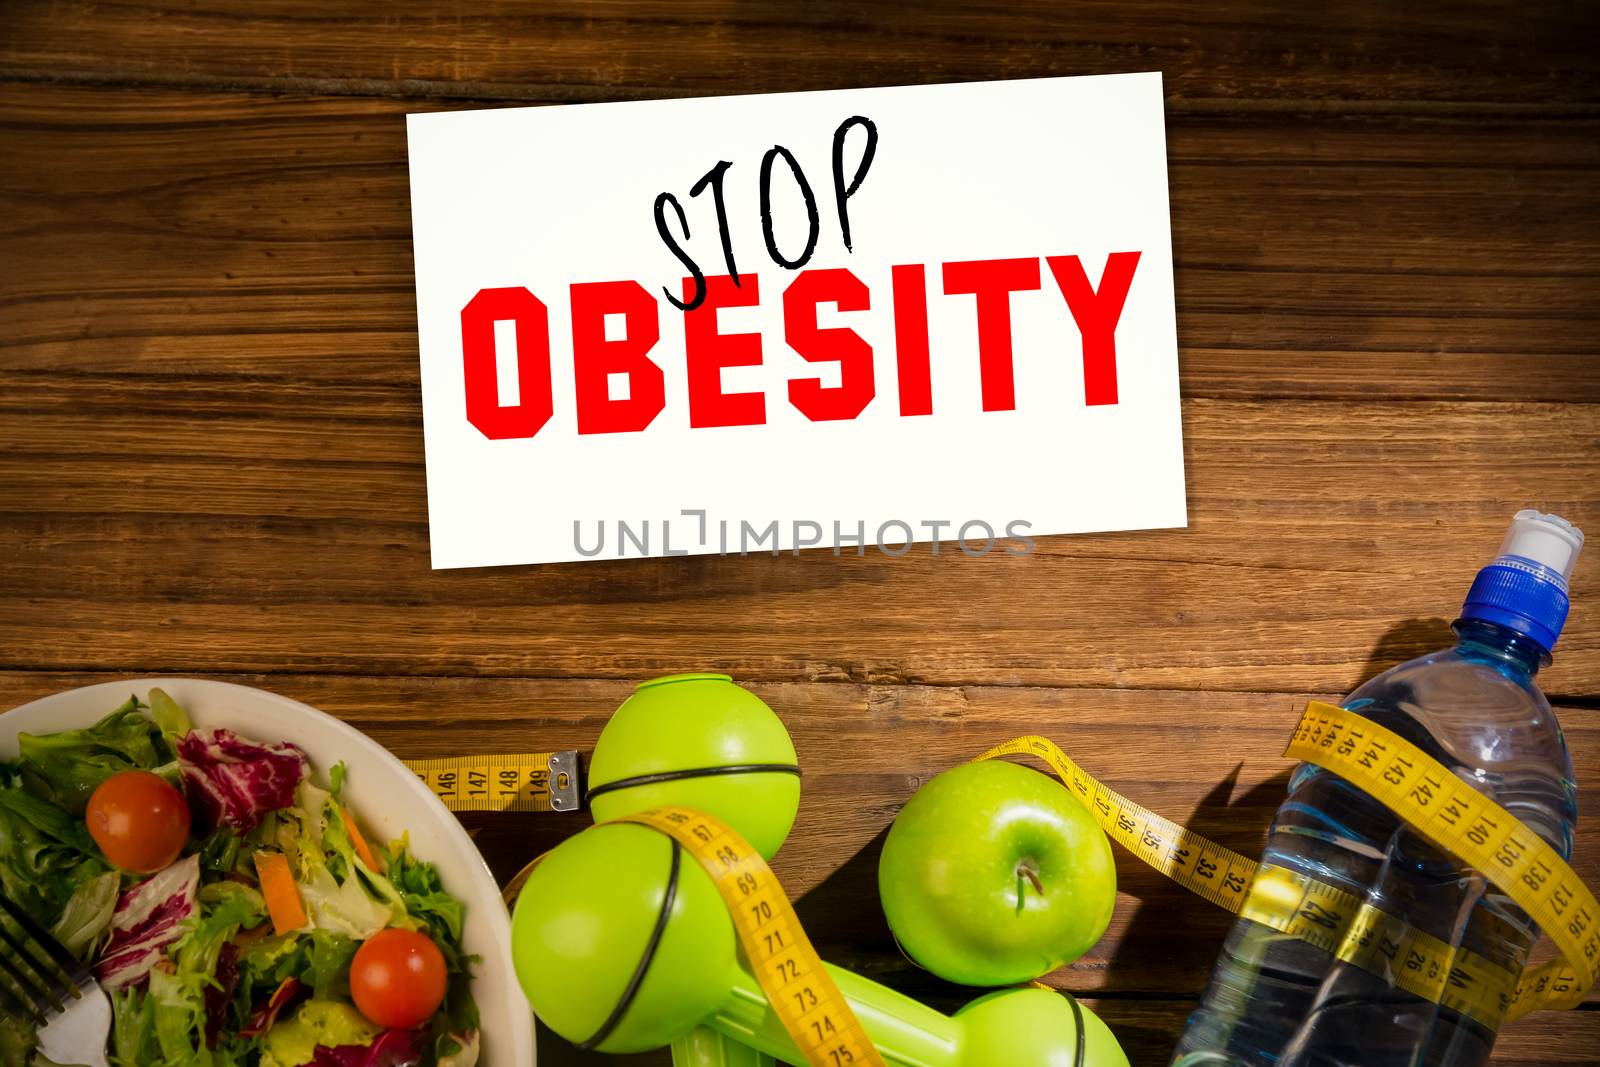 Composite image of stop obesity by Wavebreakmedia